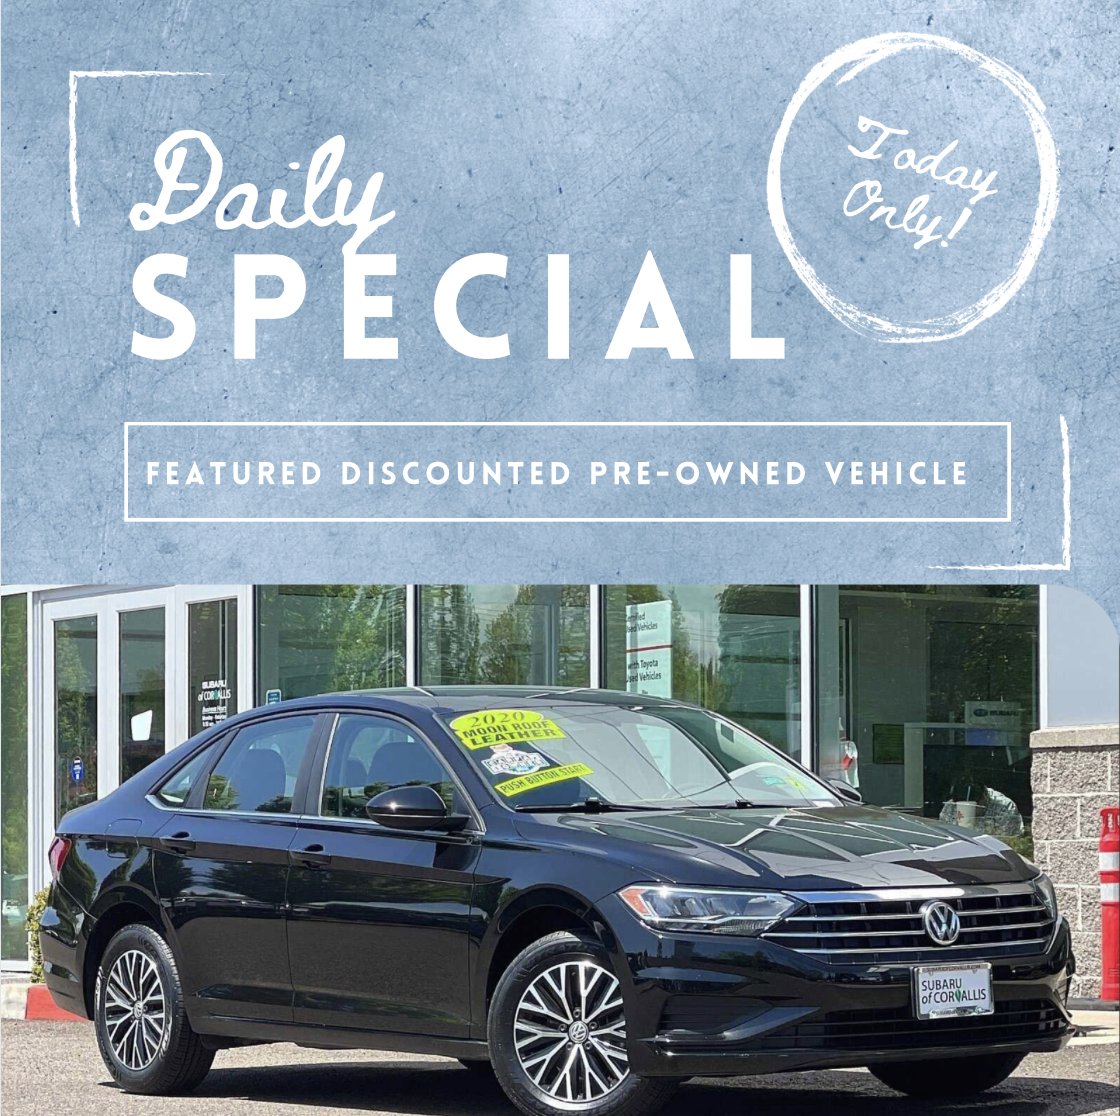 Check out today's special! A pre-owned Jetta!

subaruofcorvallis.com/inventory/used…

#subaruofcorvallis #jetta #jettaforsale #carforsale